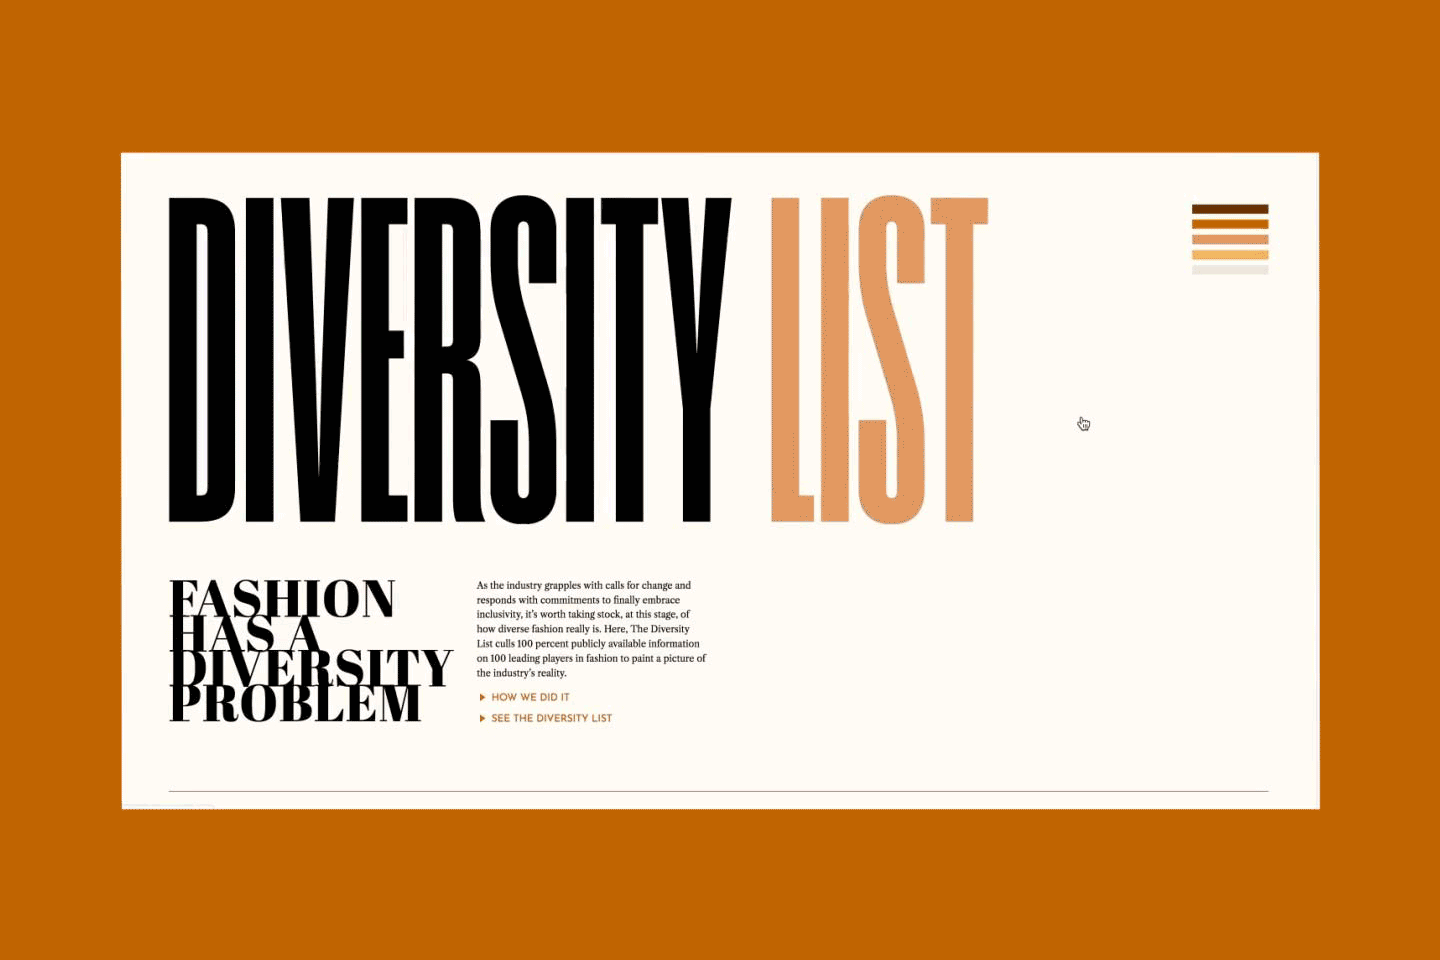 The Diversity List - A website resource to show the diversity of 100 companies